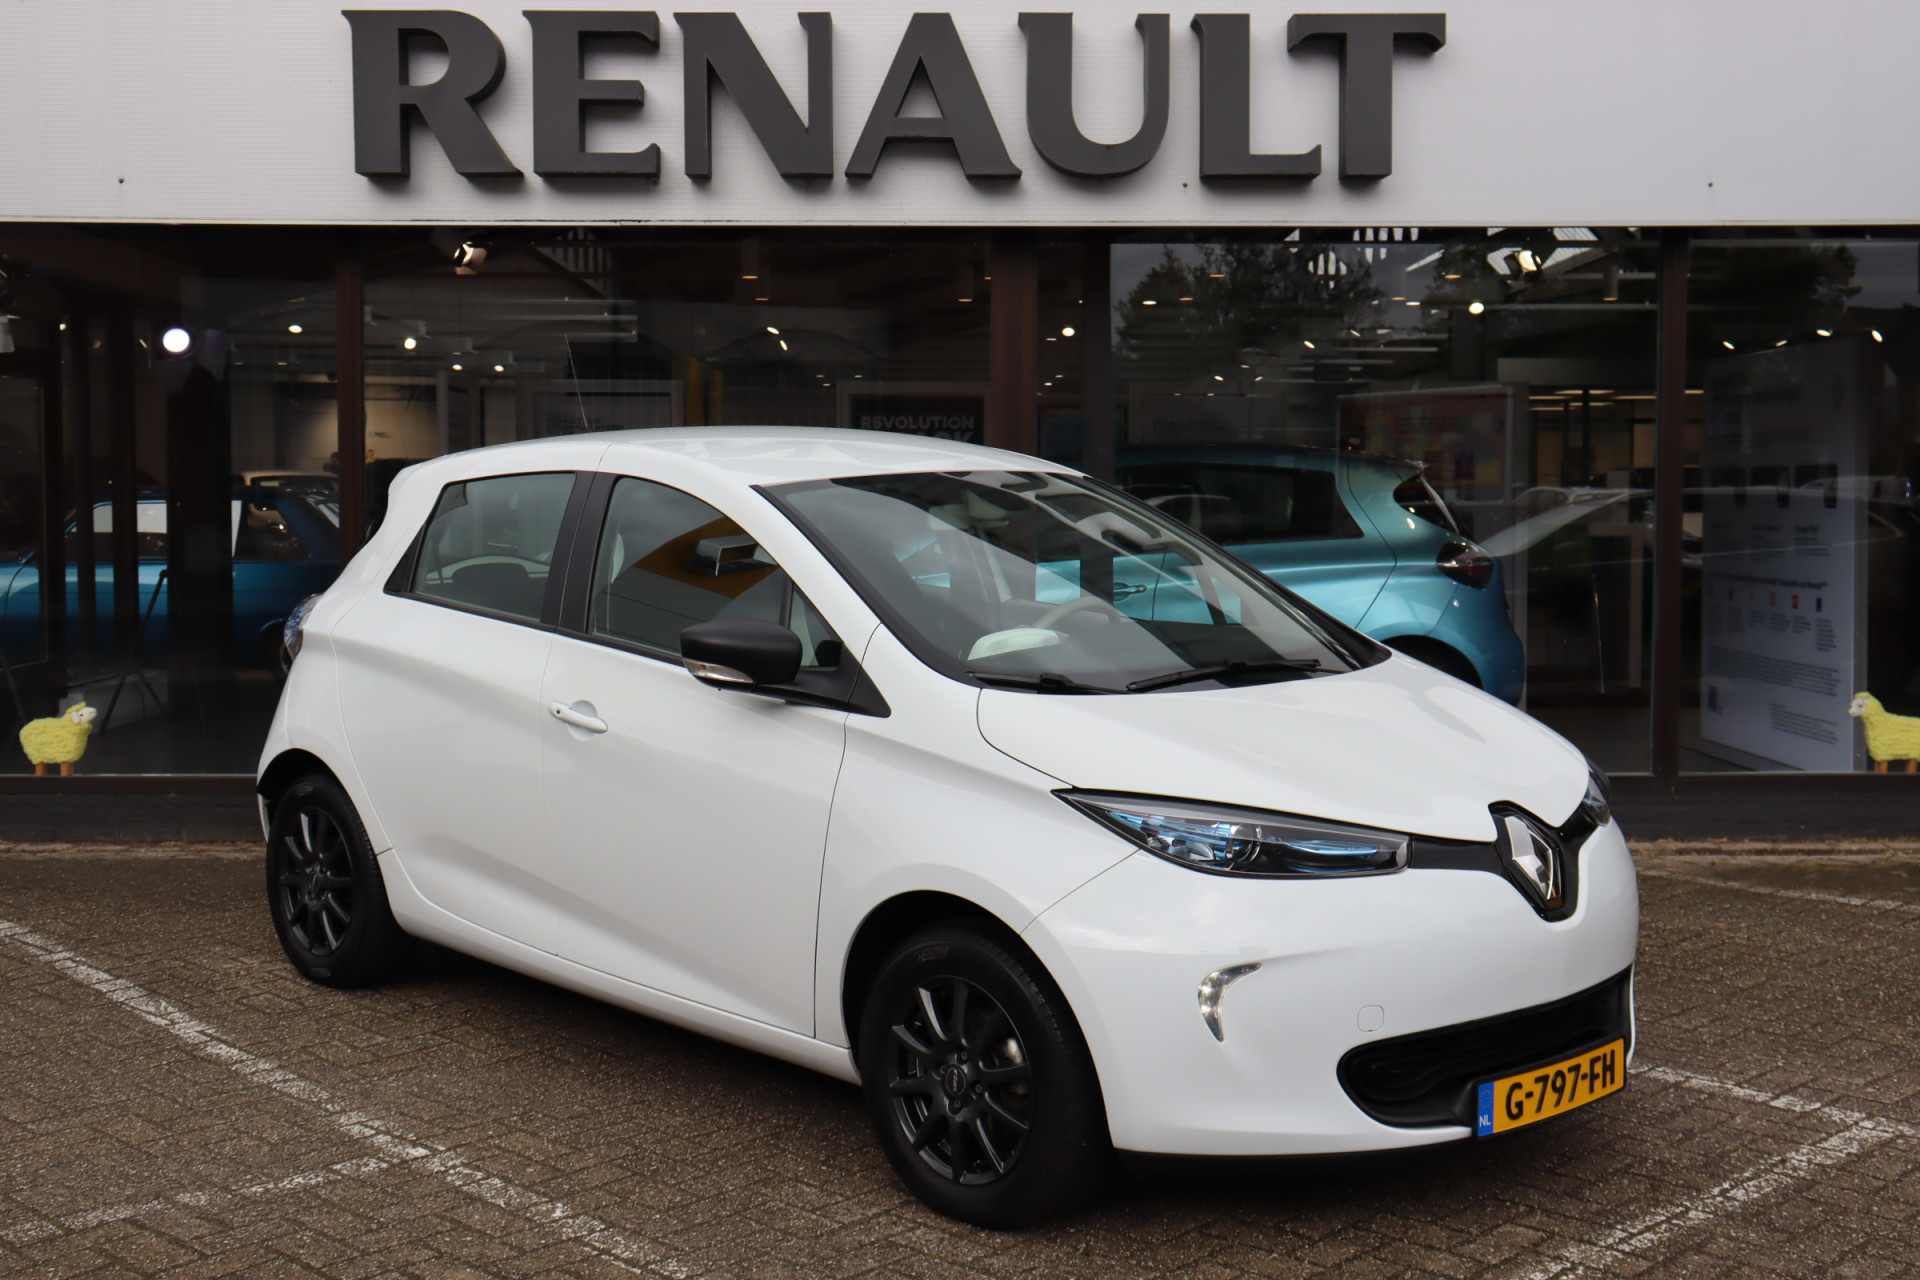 Renault ZOE R90 Life 41 kWh (Incl. Accu)